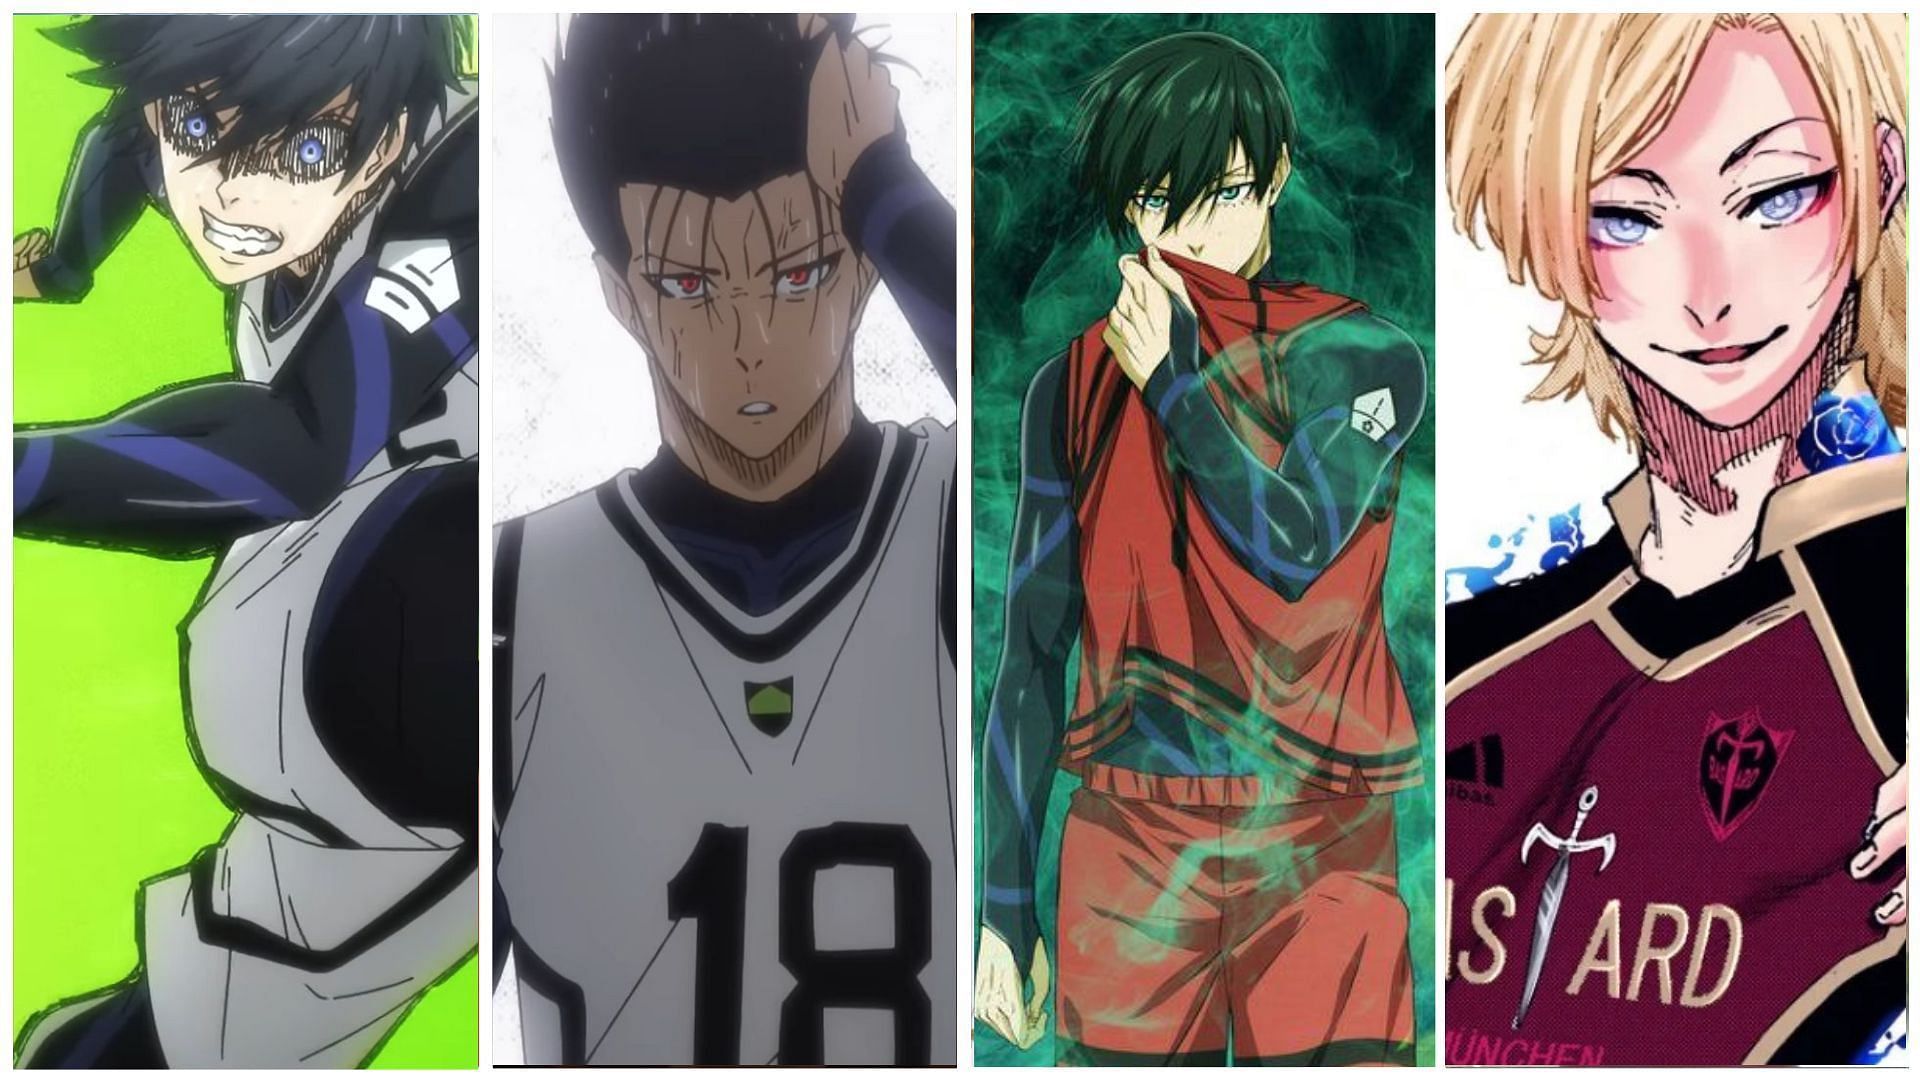 Characters appearing in Blue Lock Anime